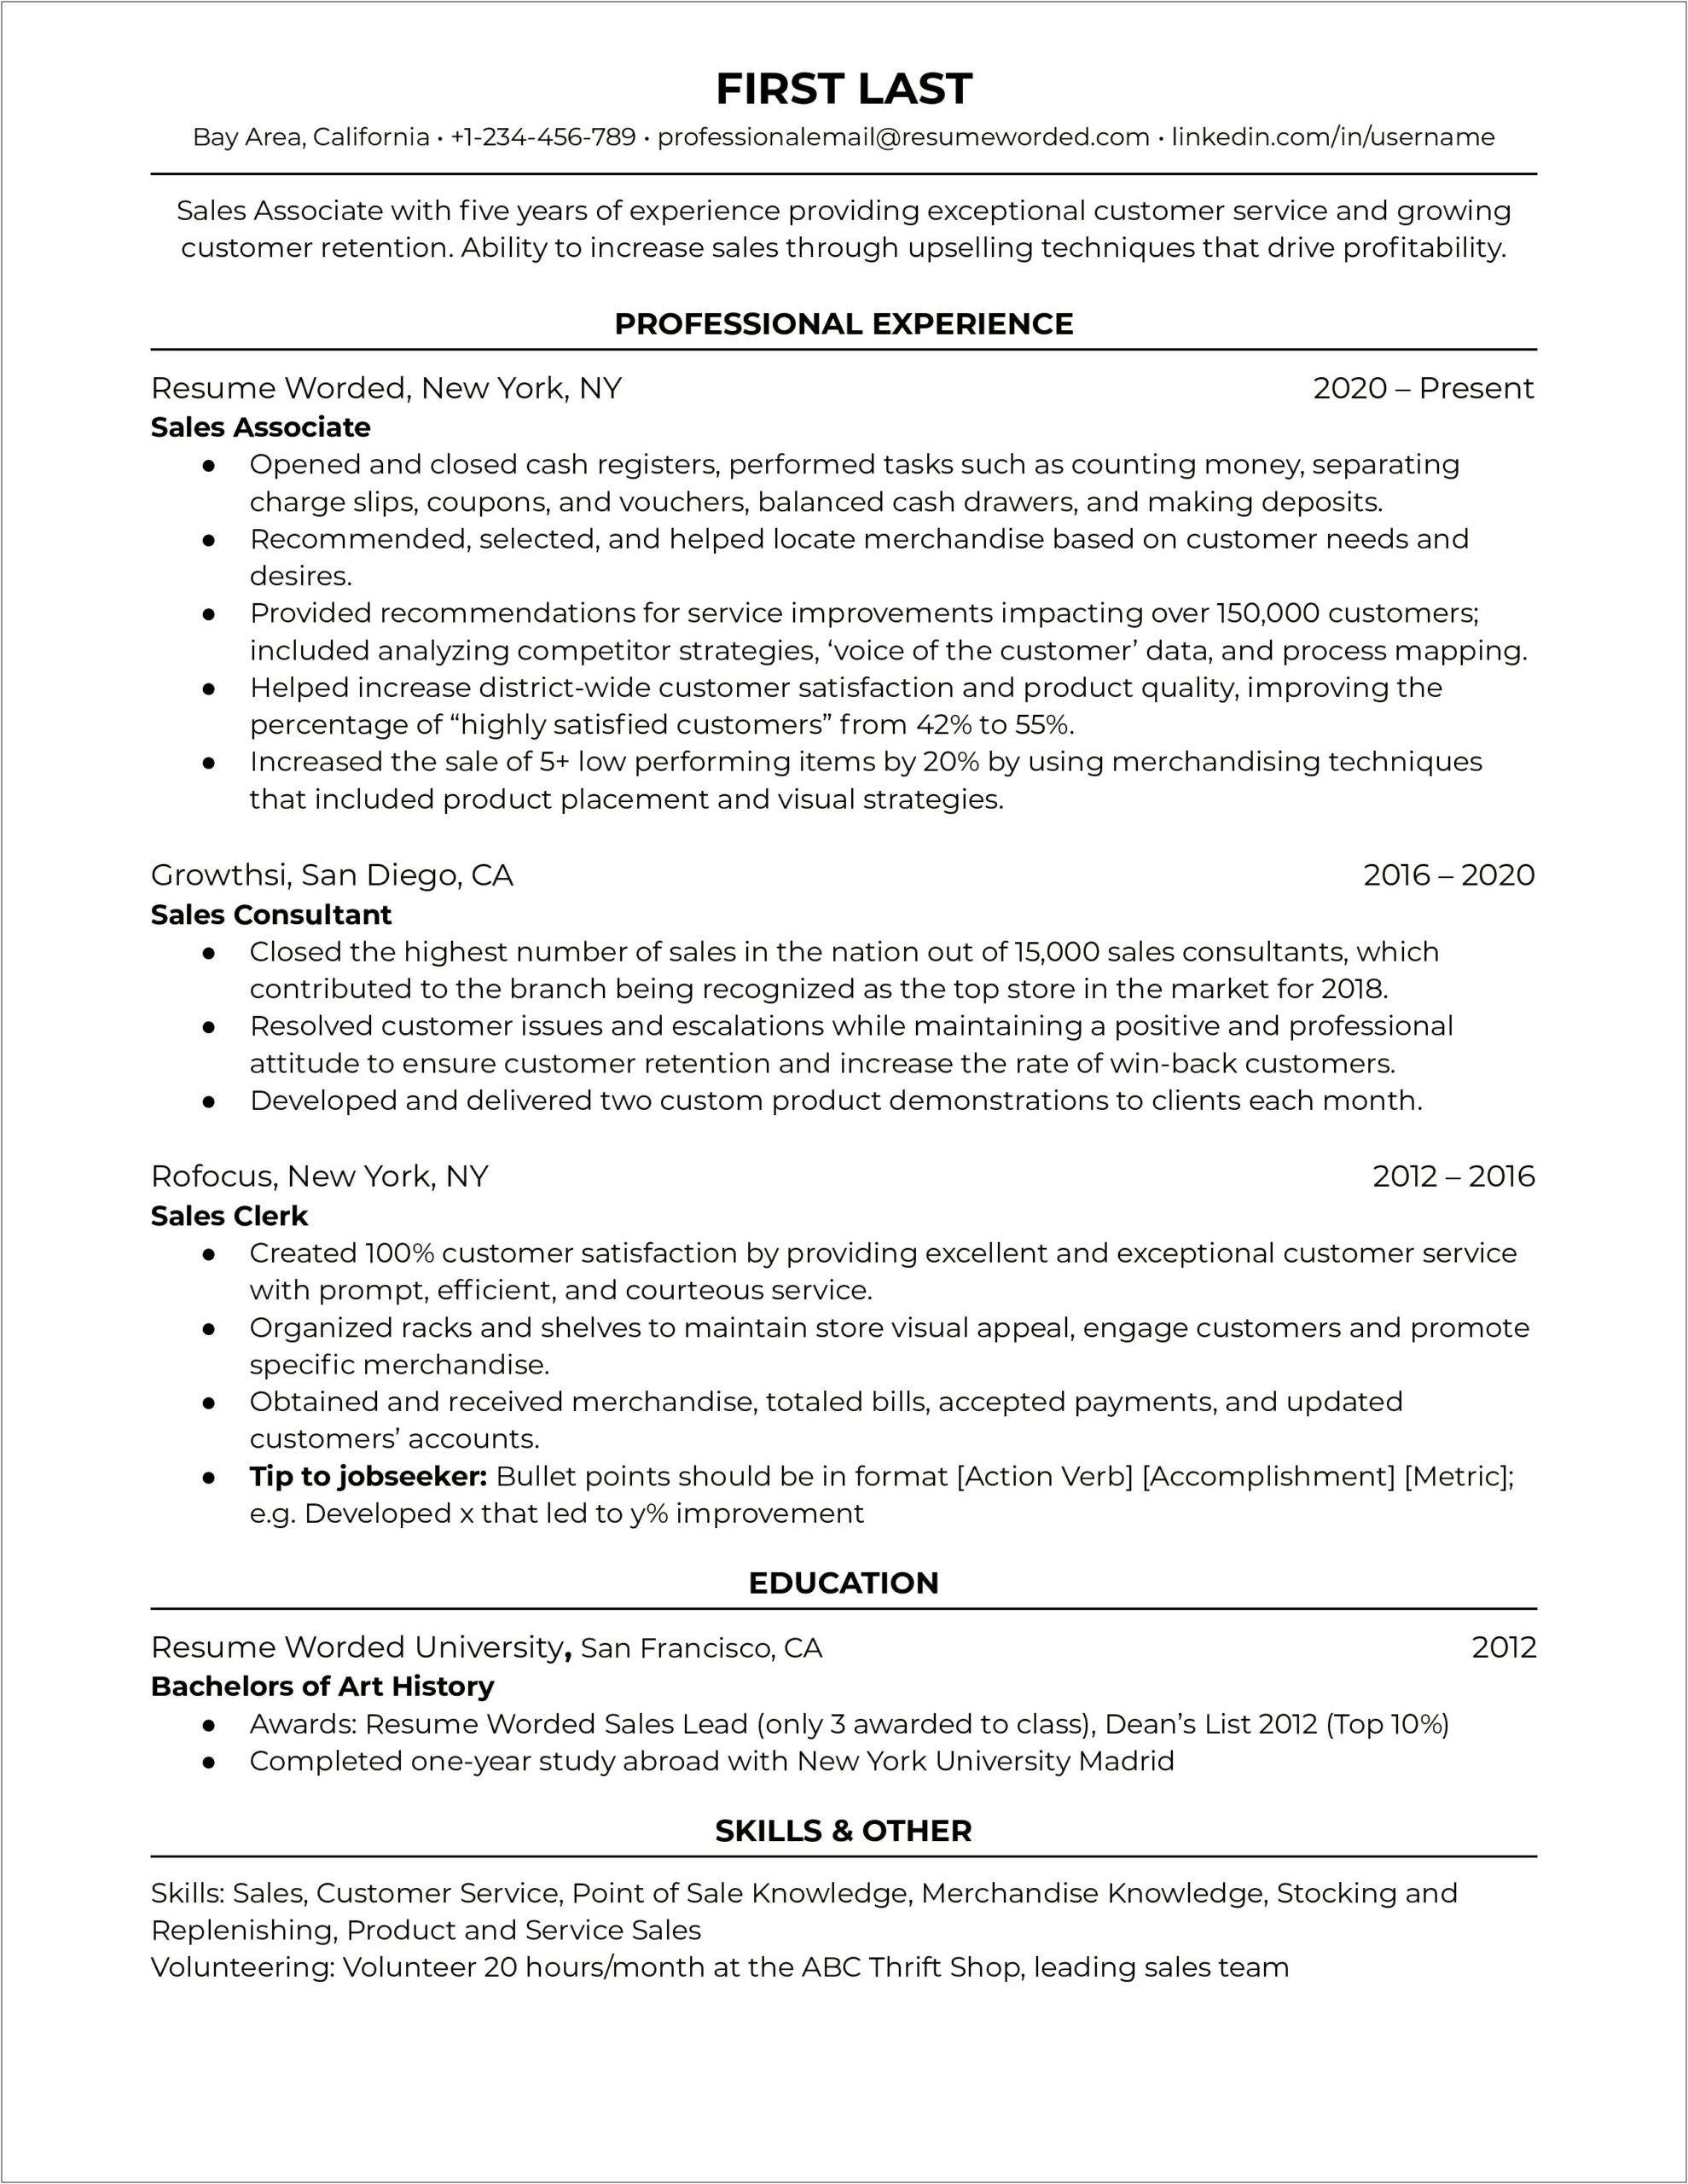 Using Serving Experience For Sales Position On Resume